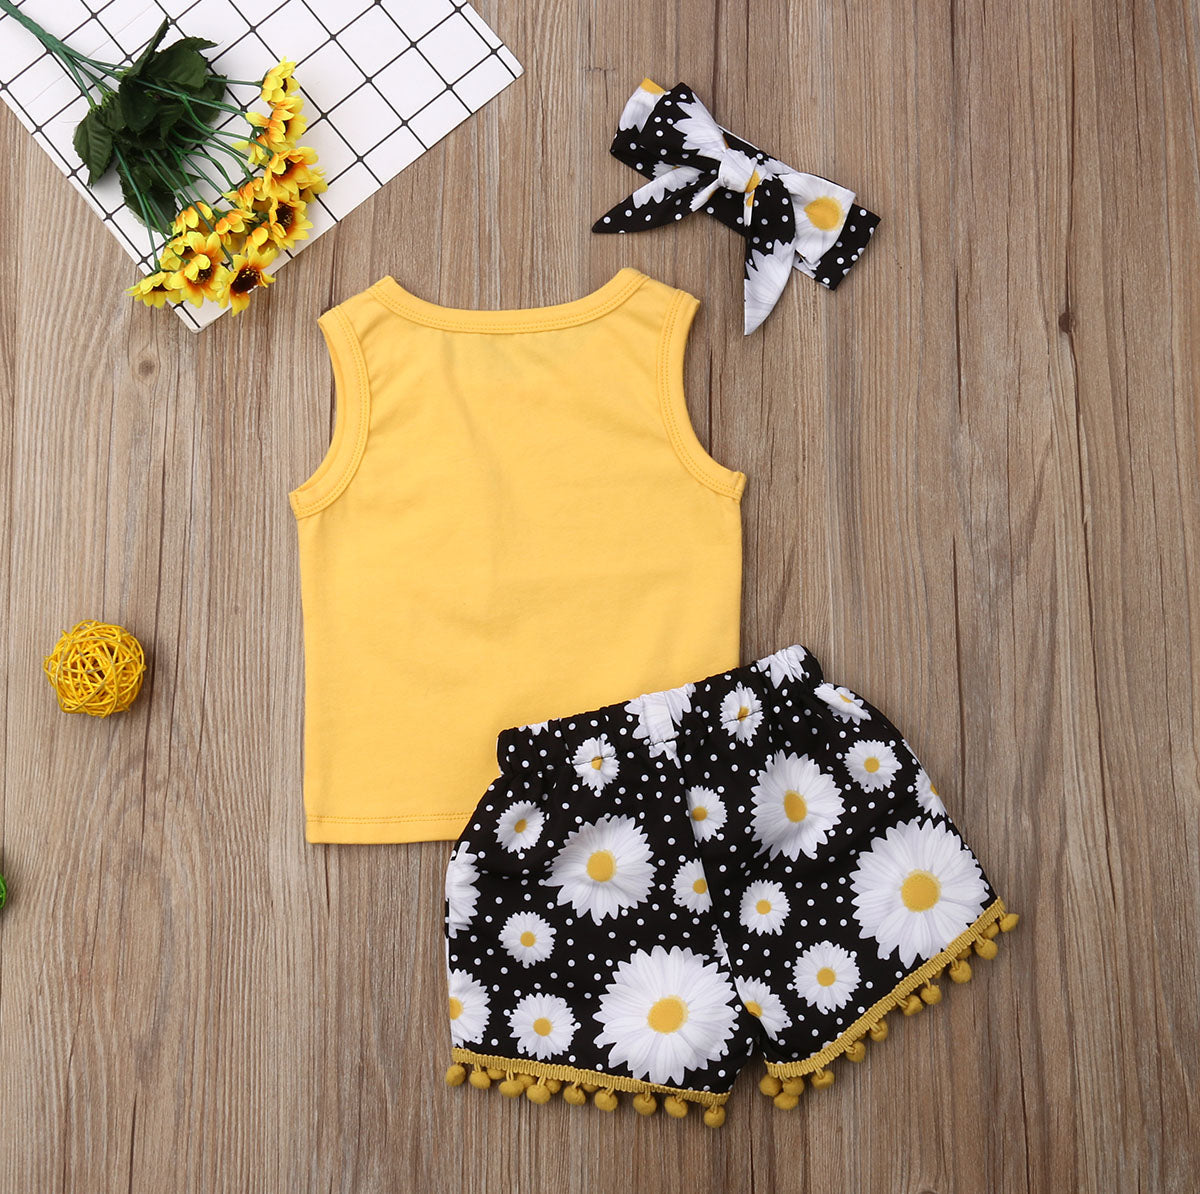 Toddler Kids Floral Tops T-Shirt Short Pants Outfit